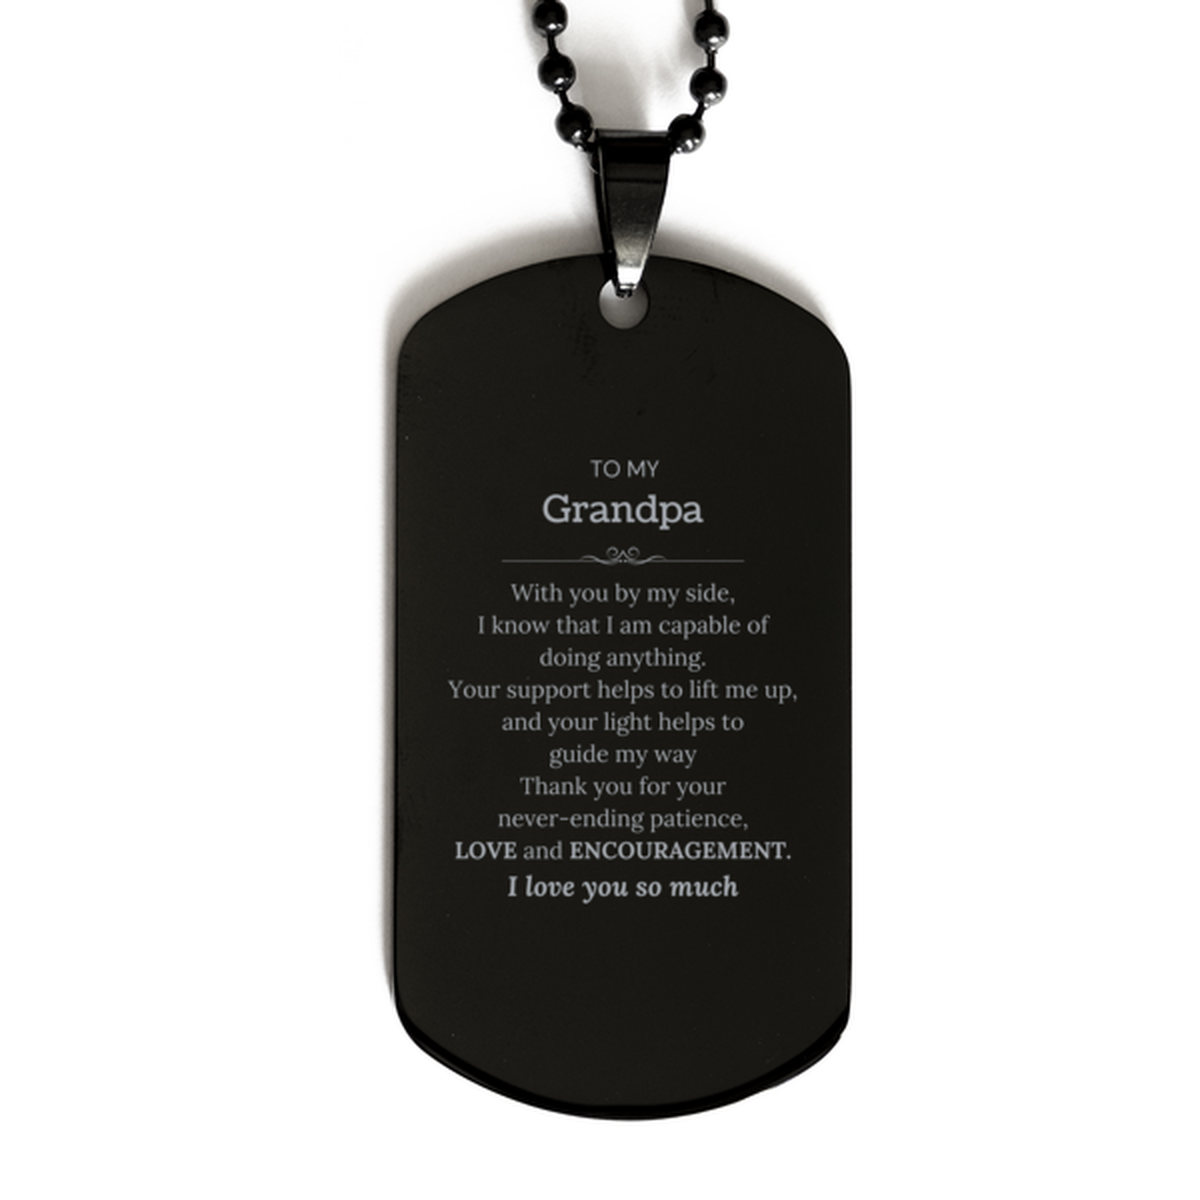 Appreciation Grandpa Black Dog Tag Gifts, To My Grandpa Birthday Christmas Wedding Keepsake Gifts for Grandpa With you by my side, I know that I am capable of doing anything. I love you so much